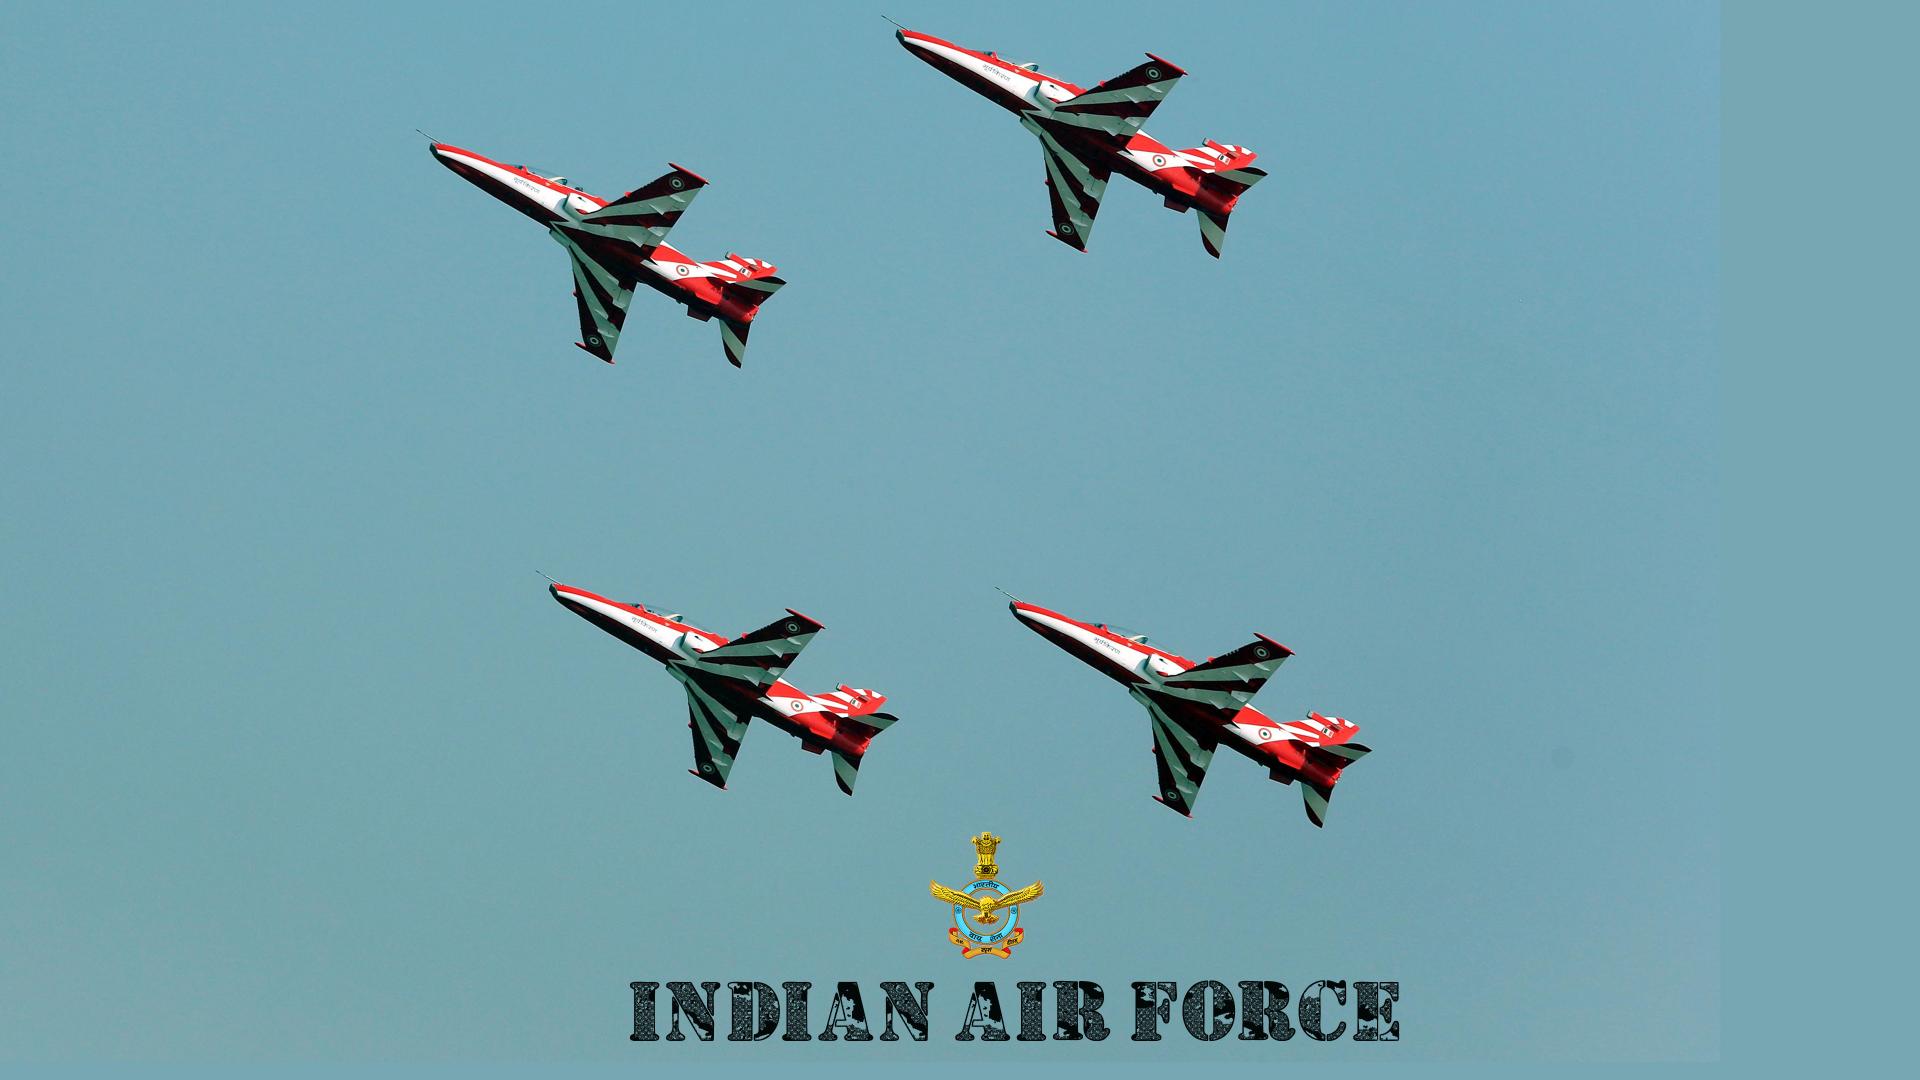 Indian Air Force Images Hd - HD Wallpaper 